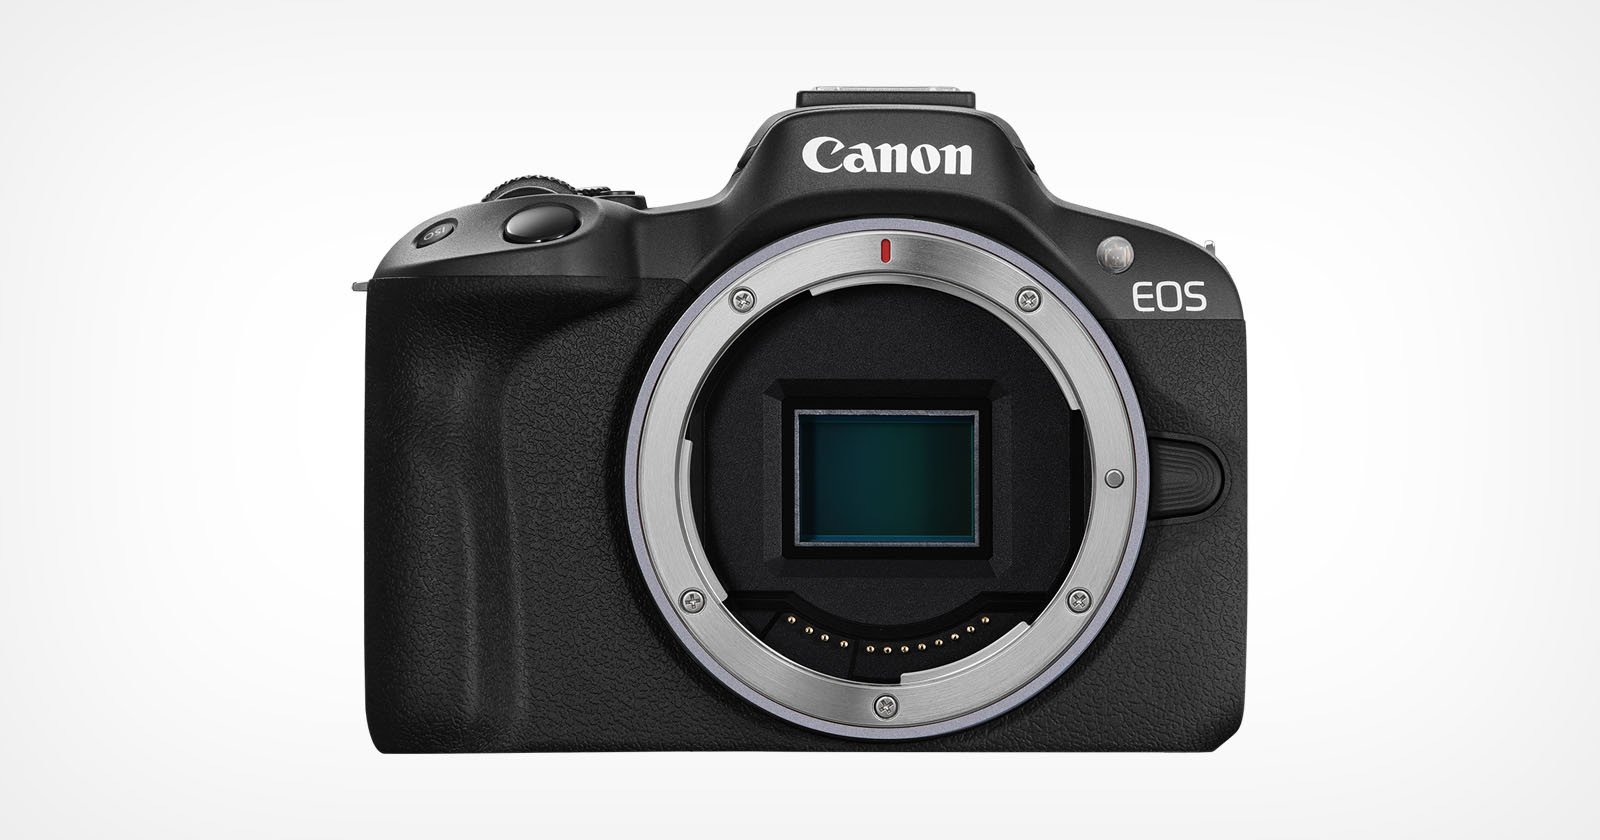 The Canon EOS R50 is the Spiritual Successor to the APS-C EOS M